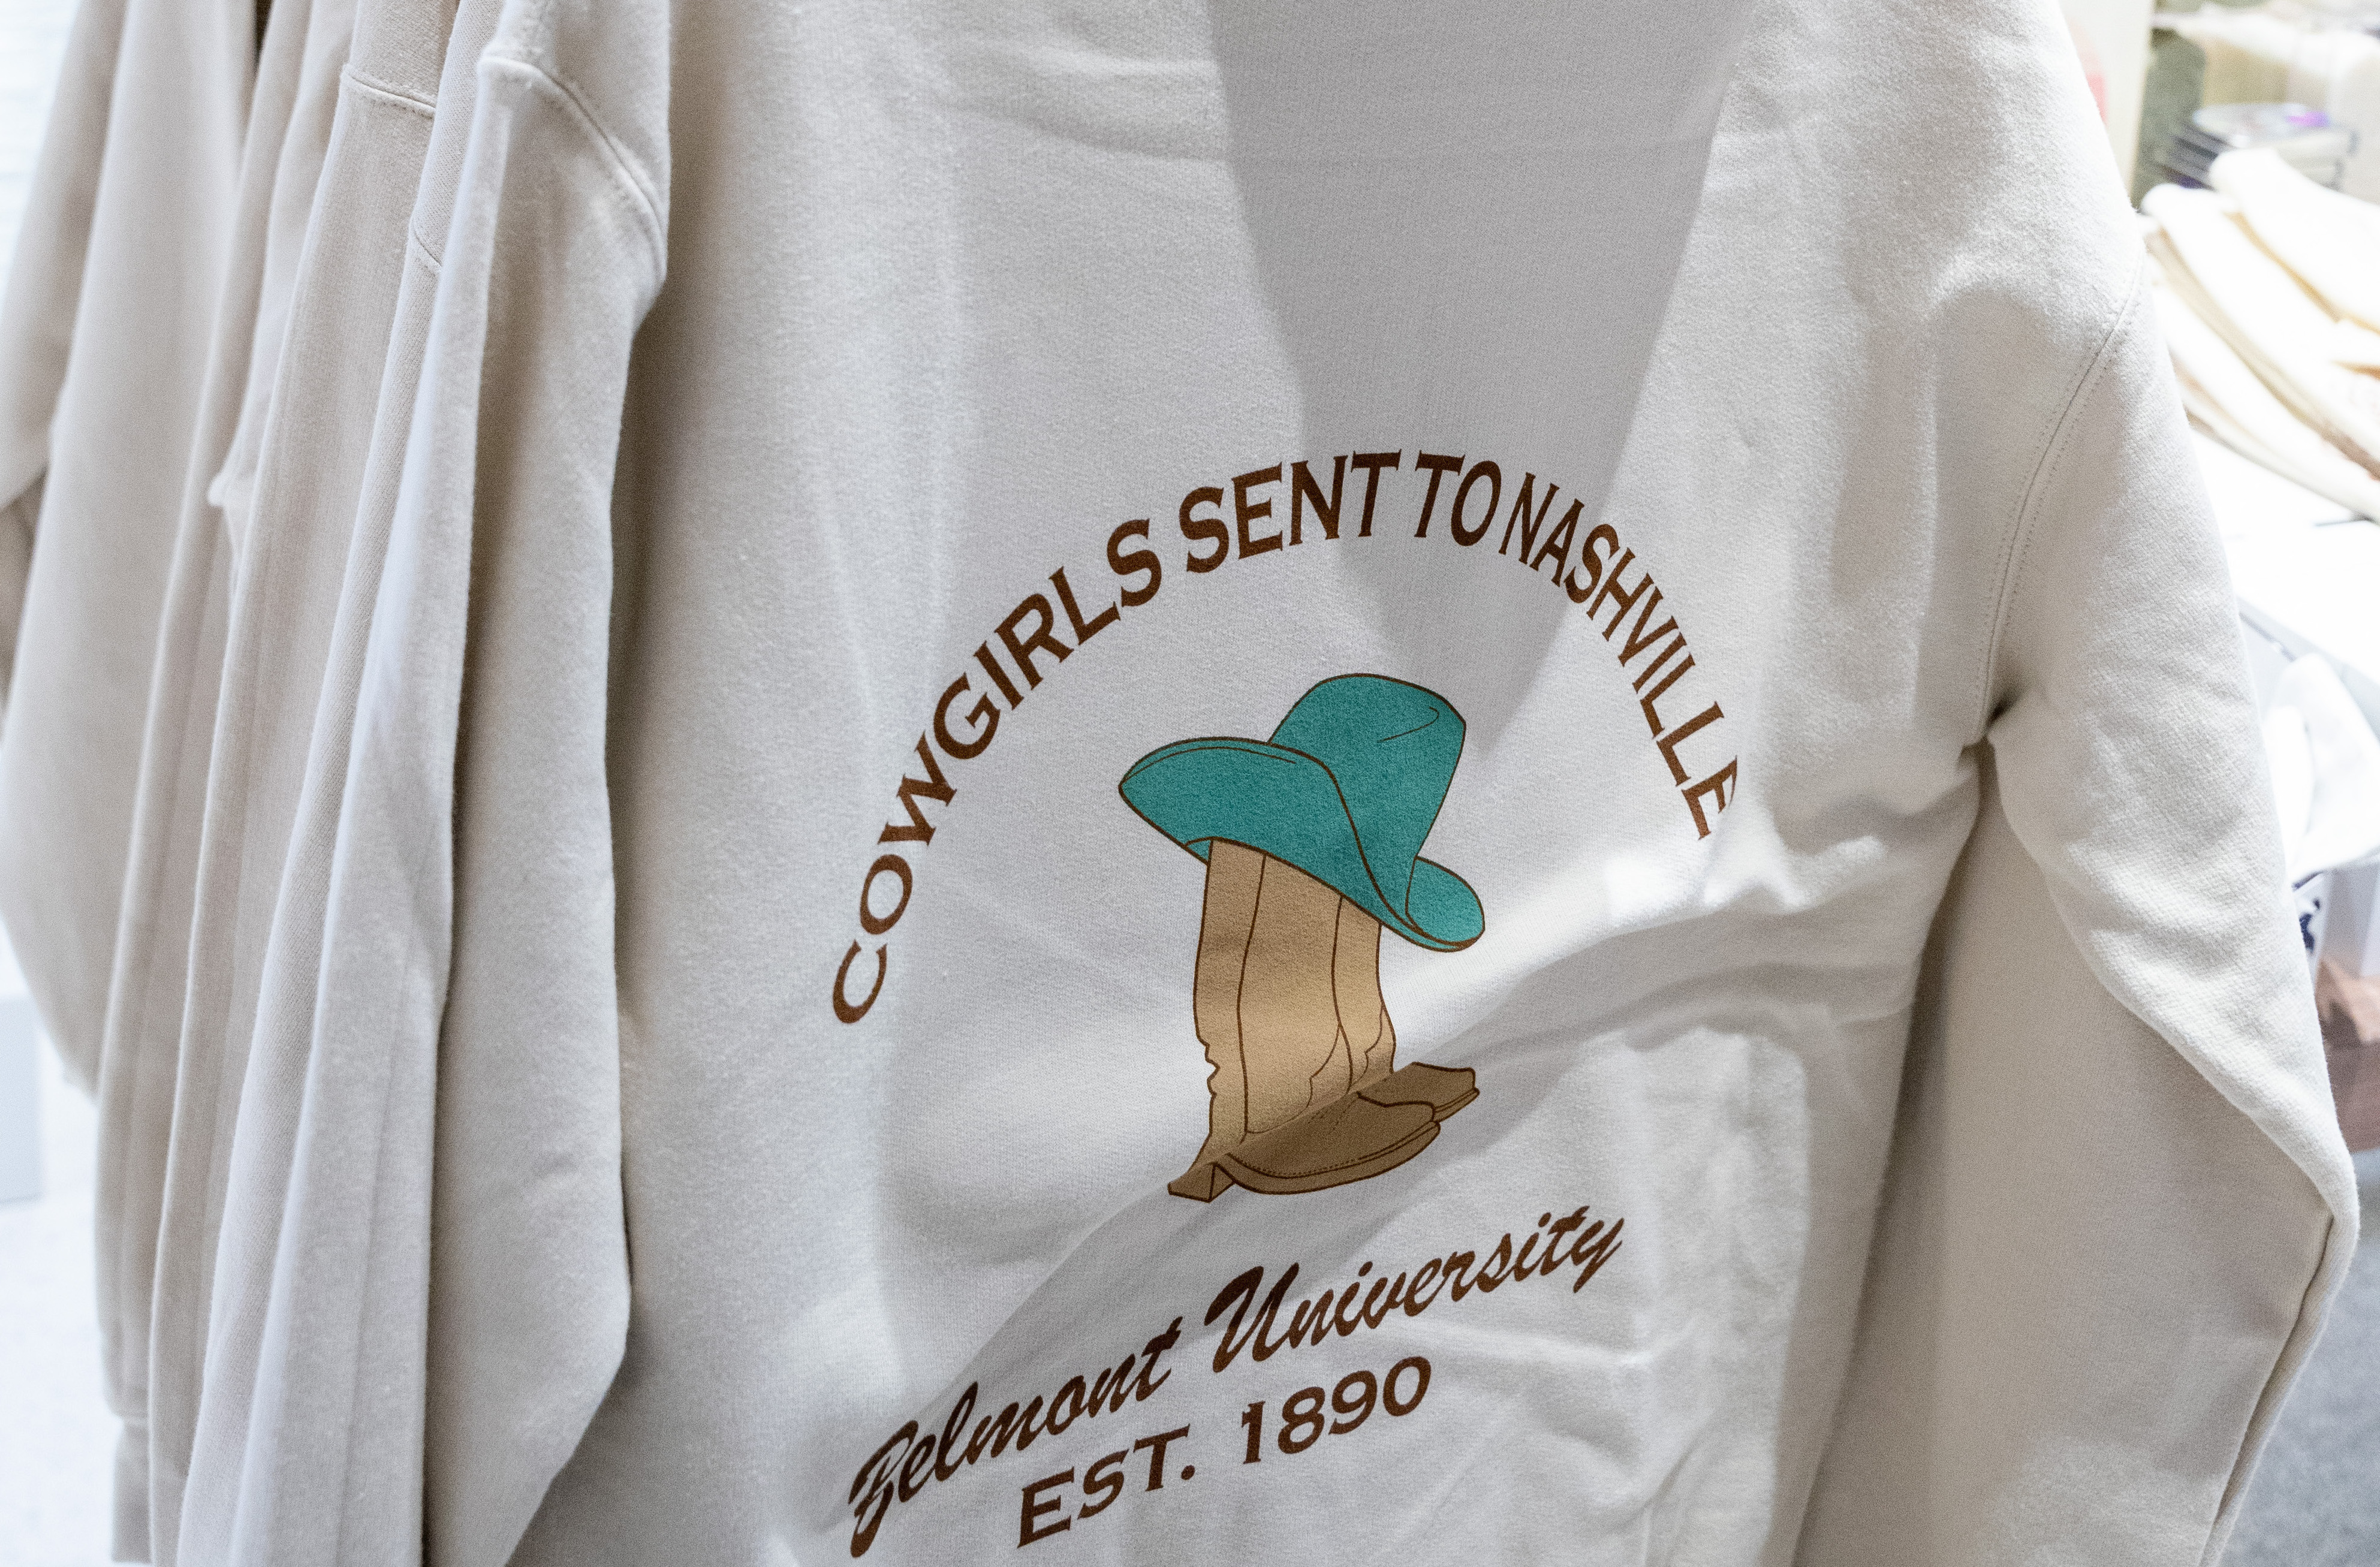 Image of a tan sweatshirt that says "Cowgirls sent to Nashville" designed by O'More students